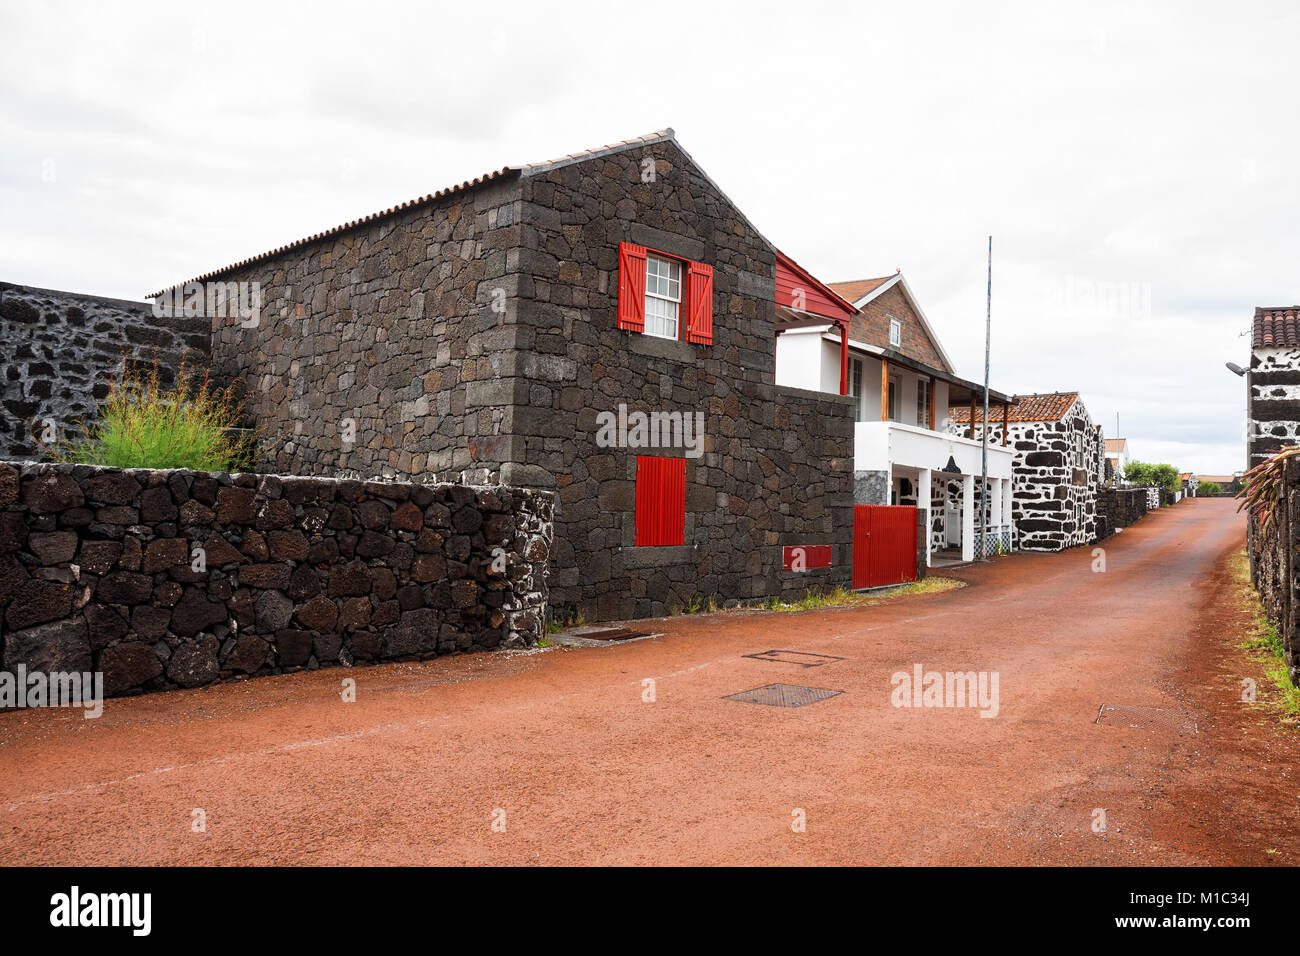 Traditional village on the island Pico with houses made of volcanic stone, Azores Stock Photo